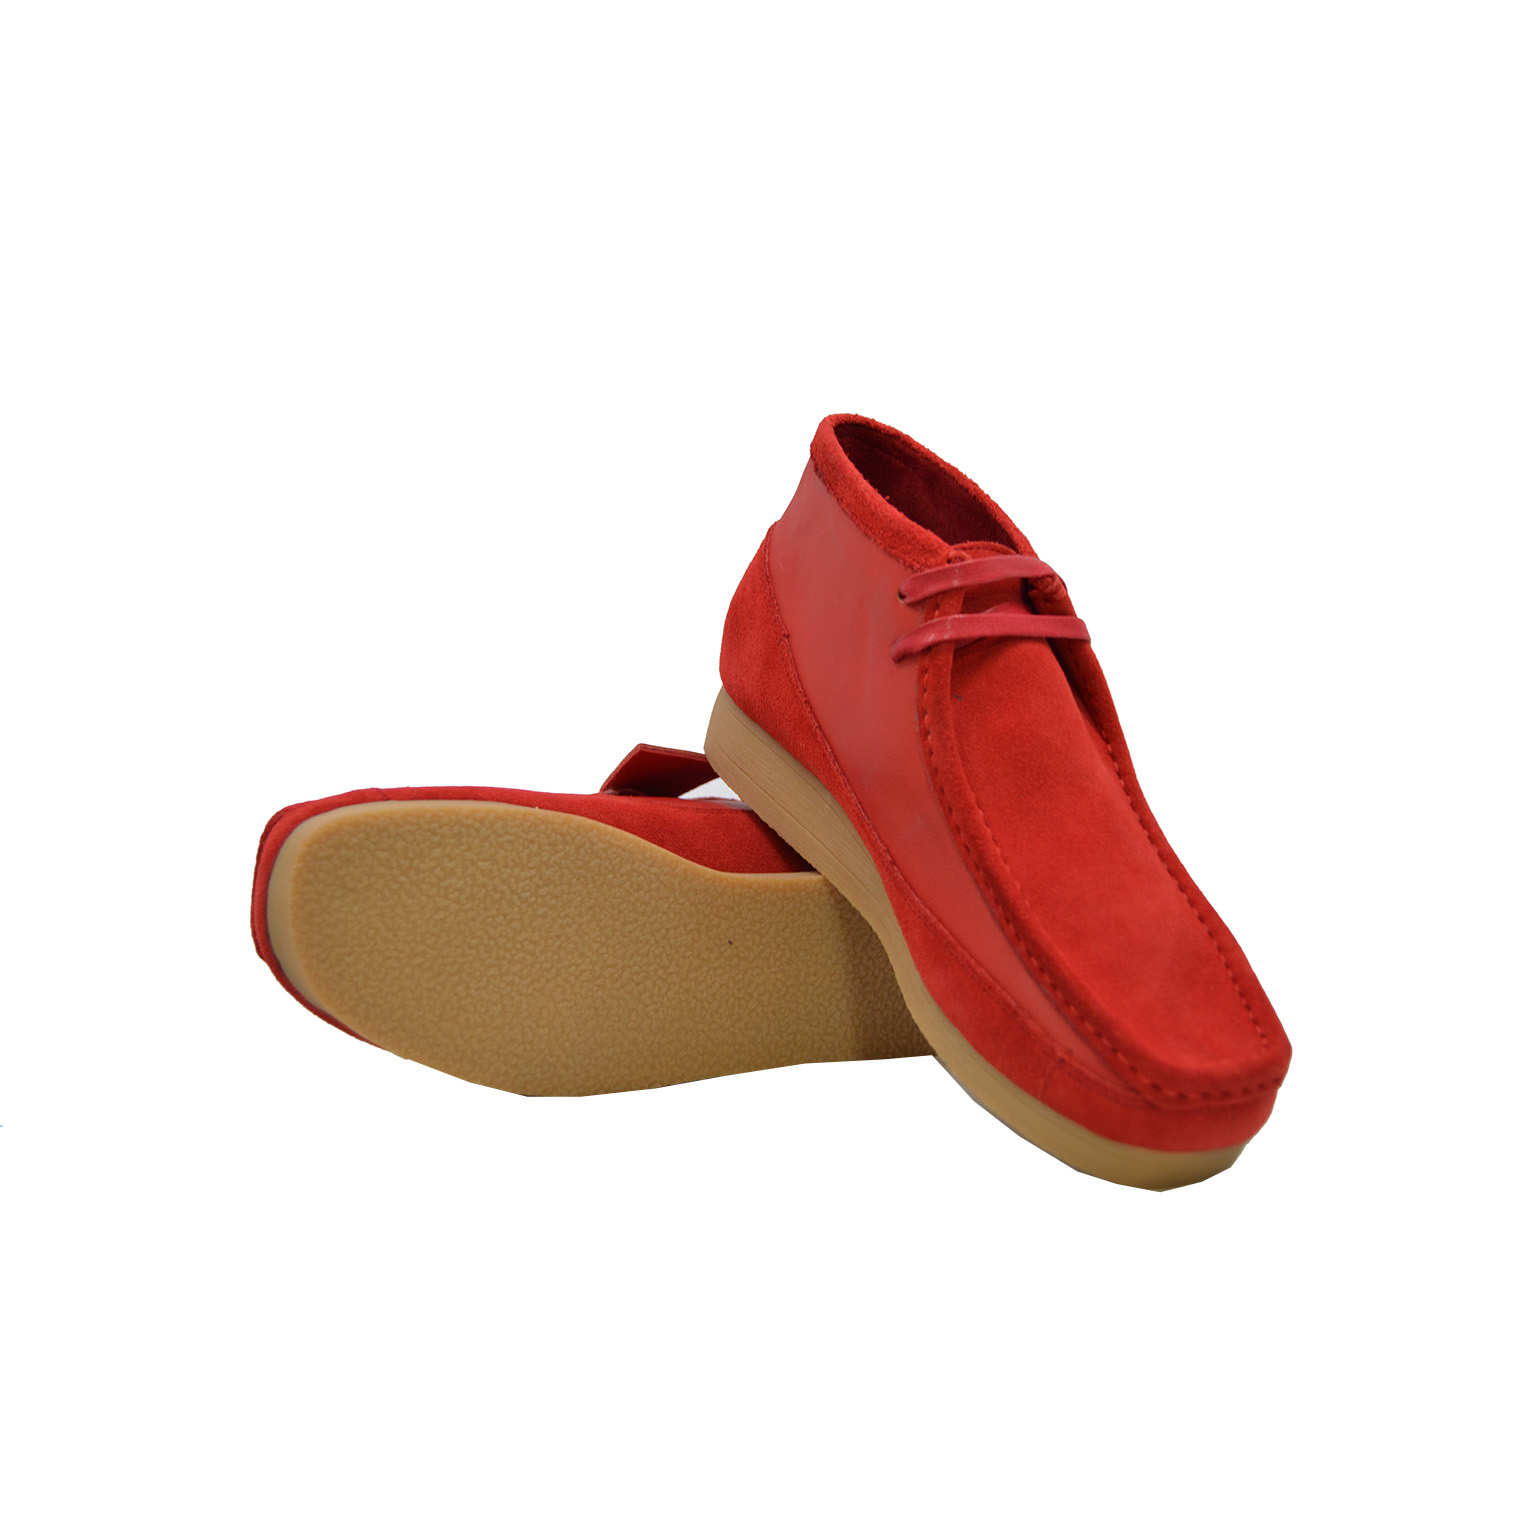 British CollectionNew Castle-Red Leather and Suede [999-8-2] - $125.00 ...